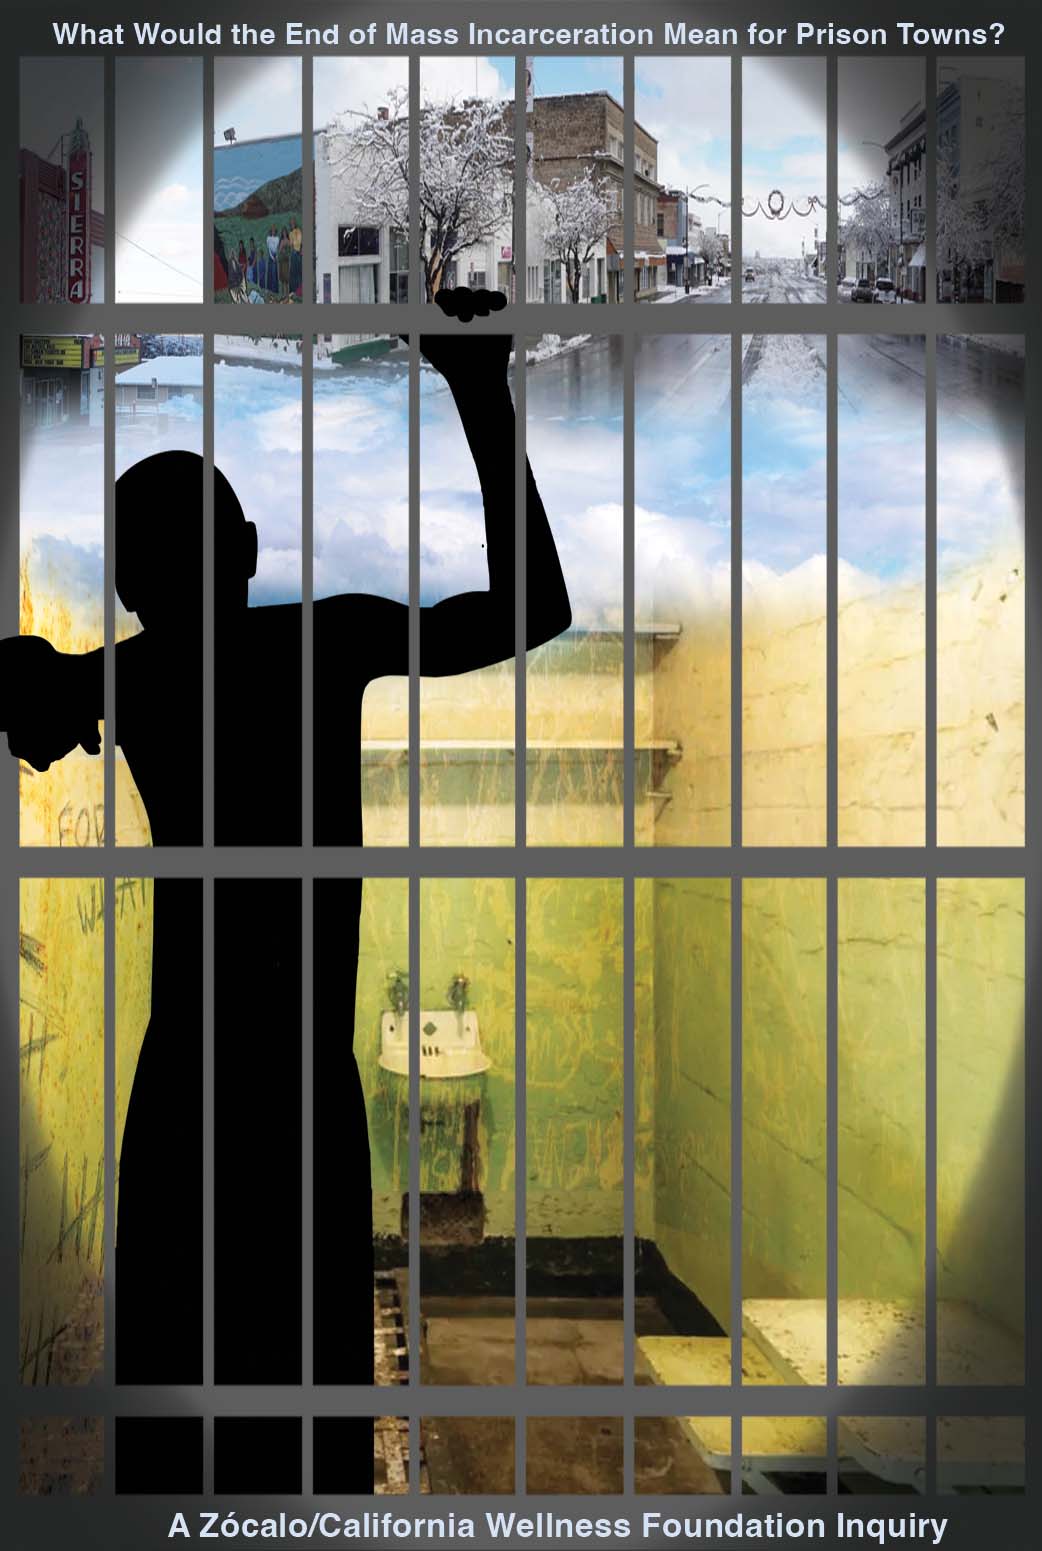 What Would the End of Mass Incarceration Mean for Prison Towns?